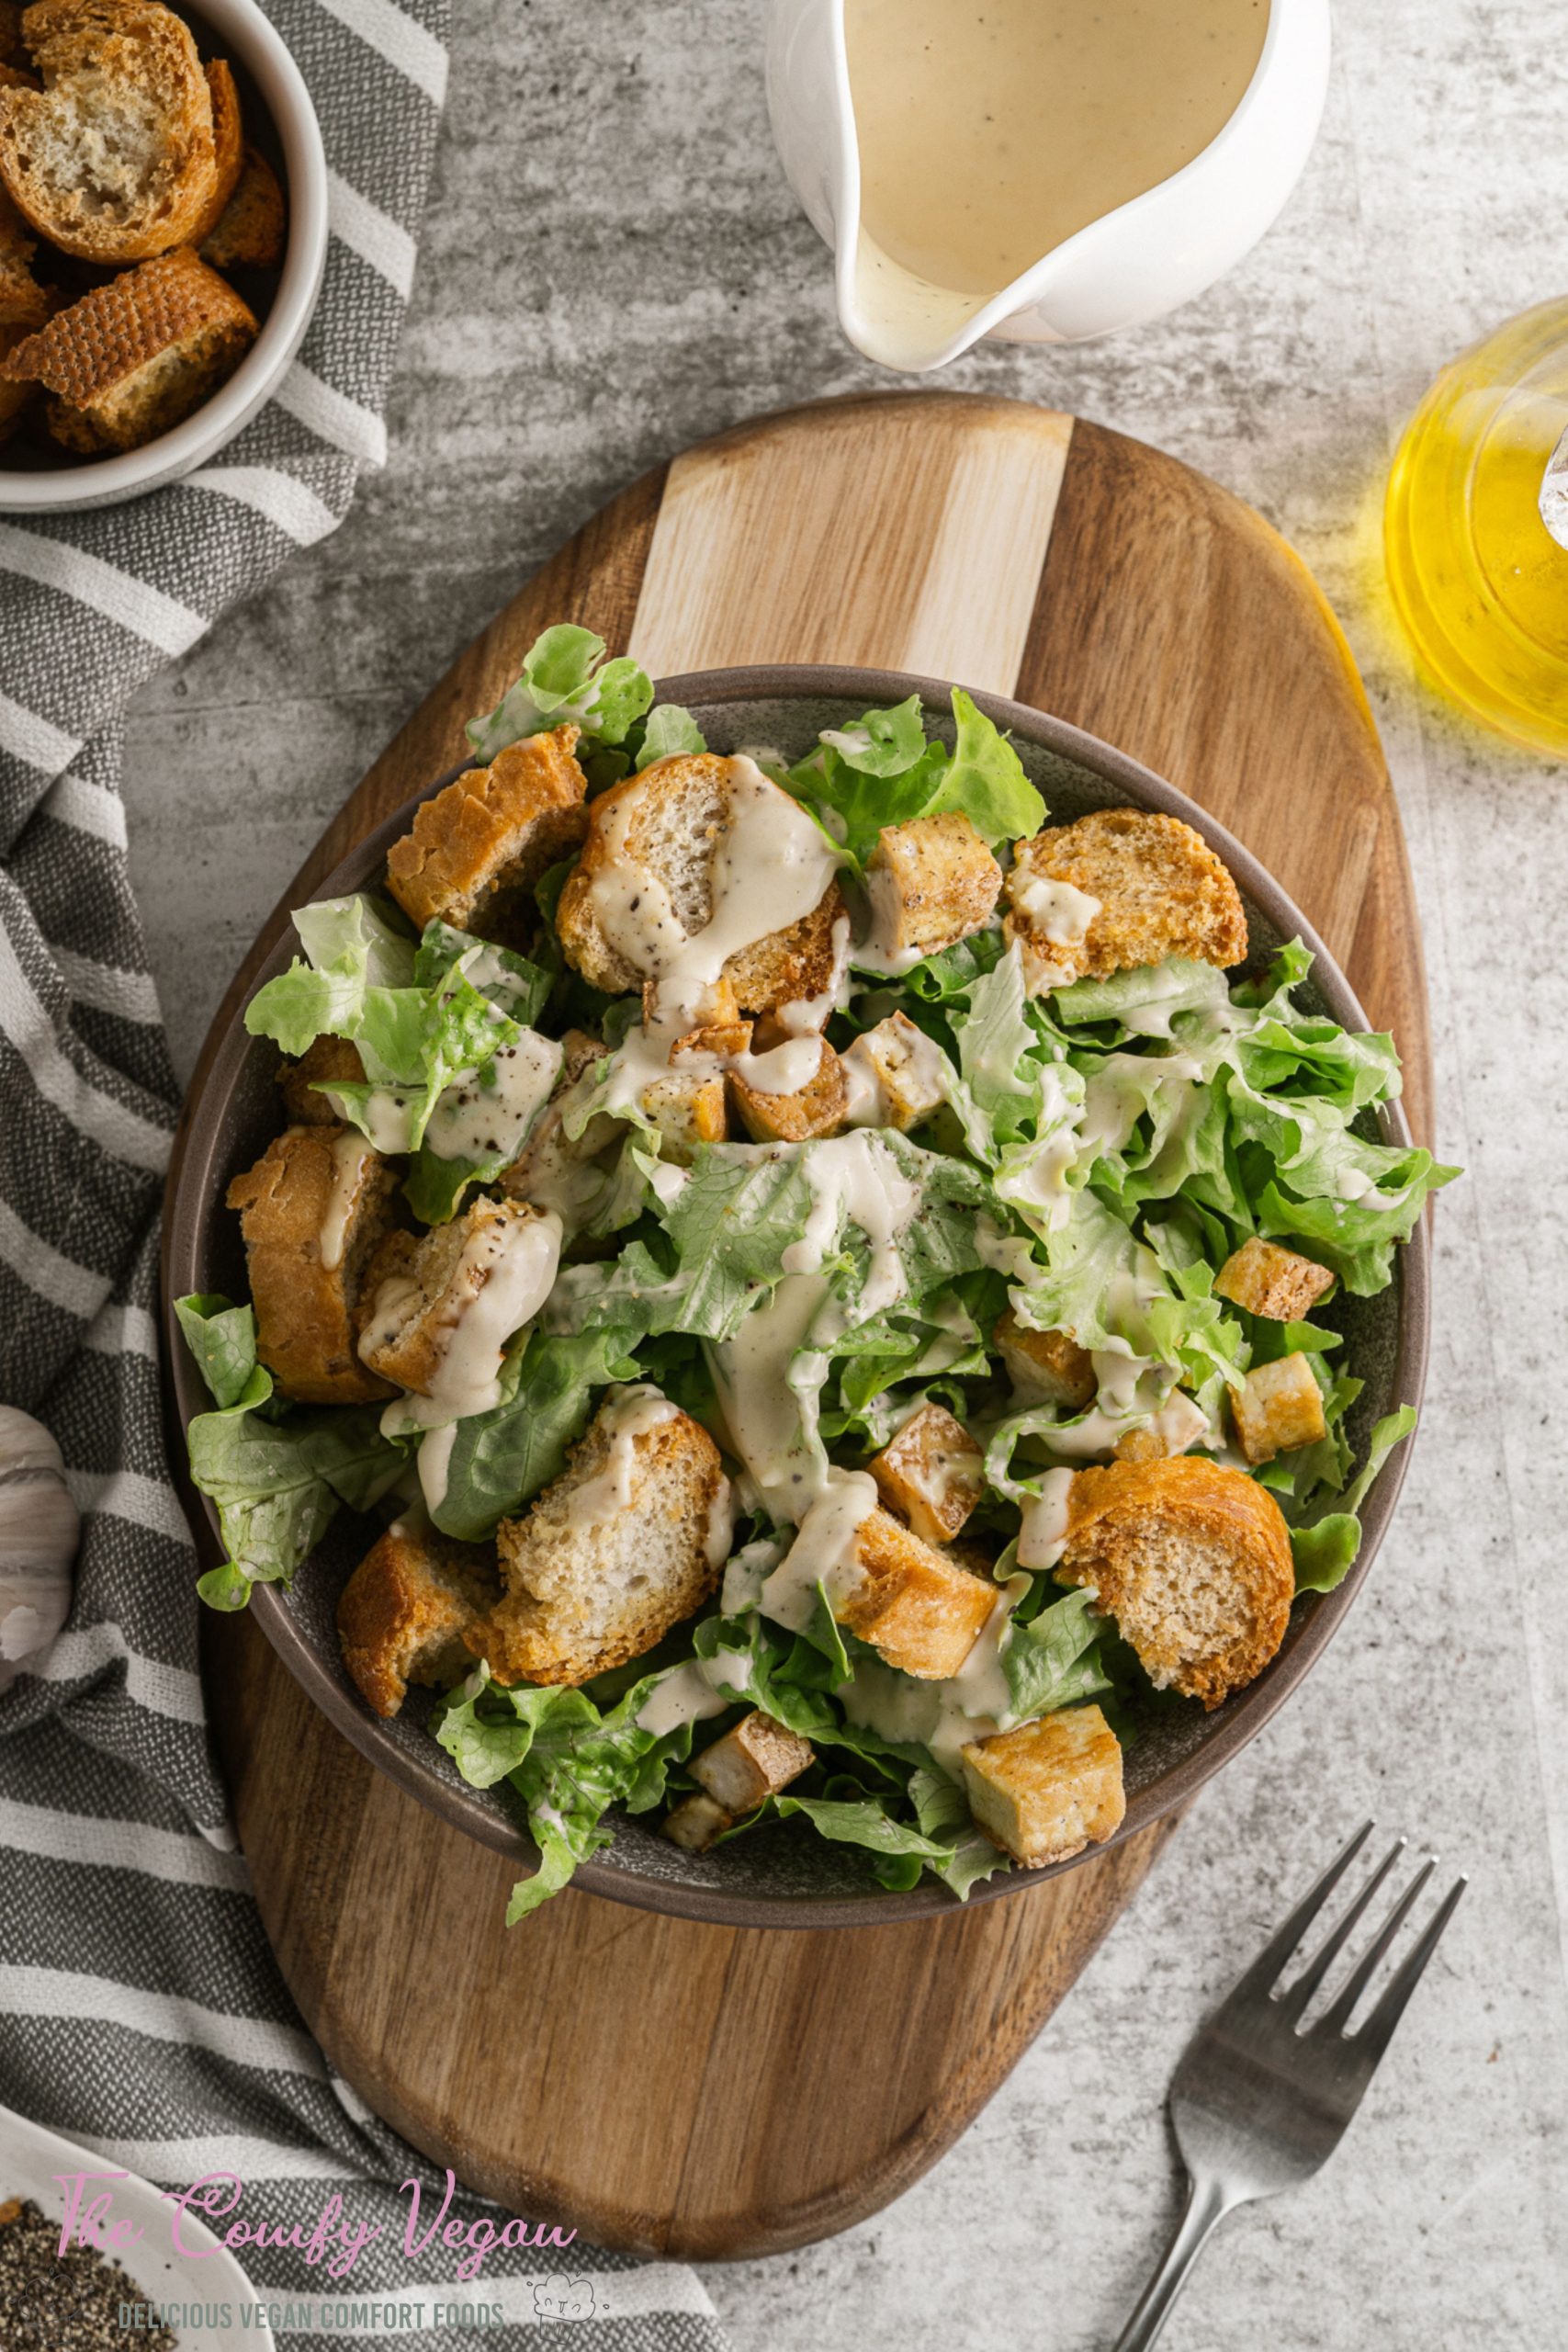 This Vegan Caesar Salad recipe is so easy to make and tastes amazing. Use this as a dip, in wraps, on salads, or top on roasted veggies. The dressing goes quickly it makes 2 large salads but you might want to double the batch.